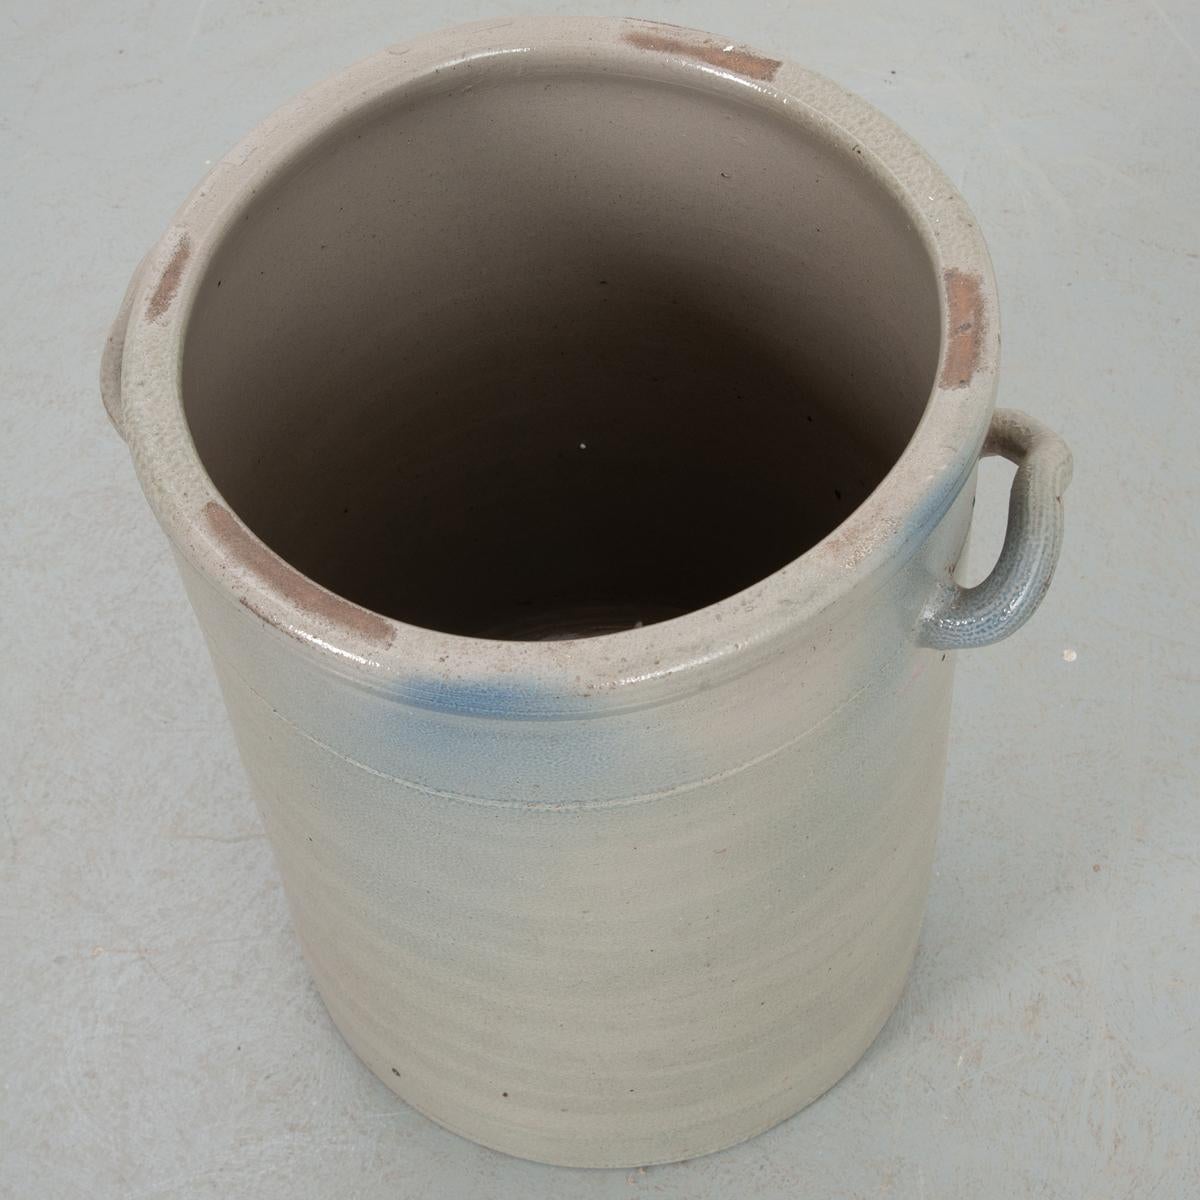 This is a charming ceramic storage jar, painted a light gray color. Its medium size makes it a versatile piece that will easily incorporate into your existing decor. Fixed with two upturned handles for carrying. The interior measures 12-¼”. Make